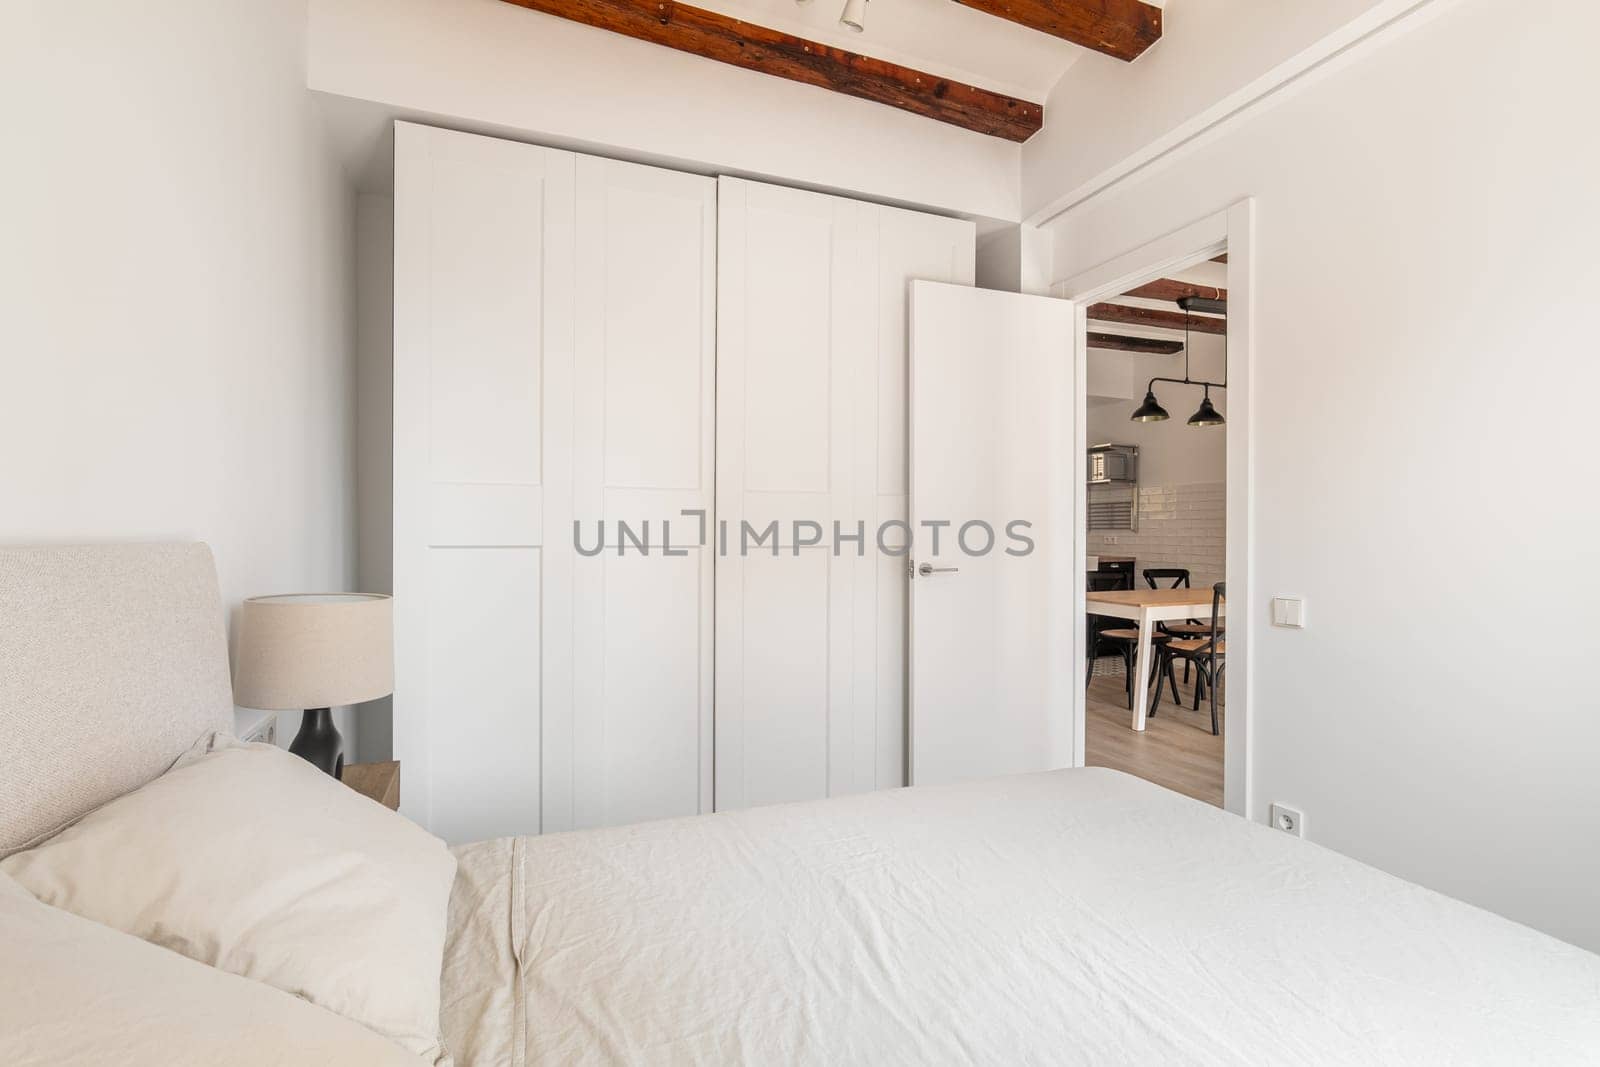 Large wardrobe and soft double bed in white minimalist bedroom. Renovated apartment interior with place to rest and furniture. House design